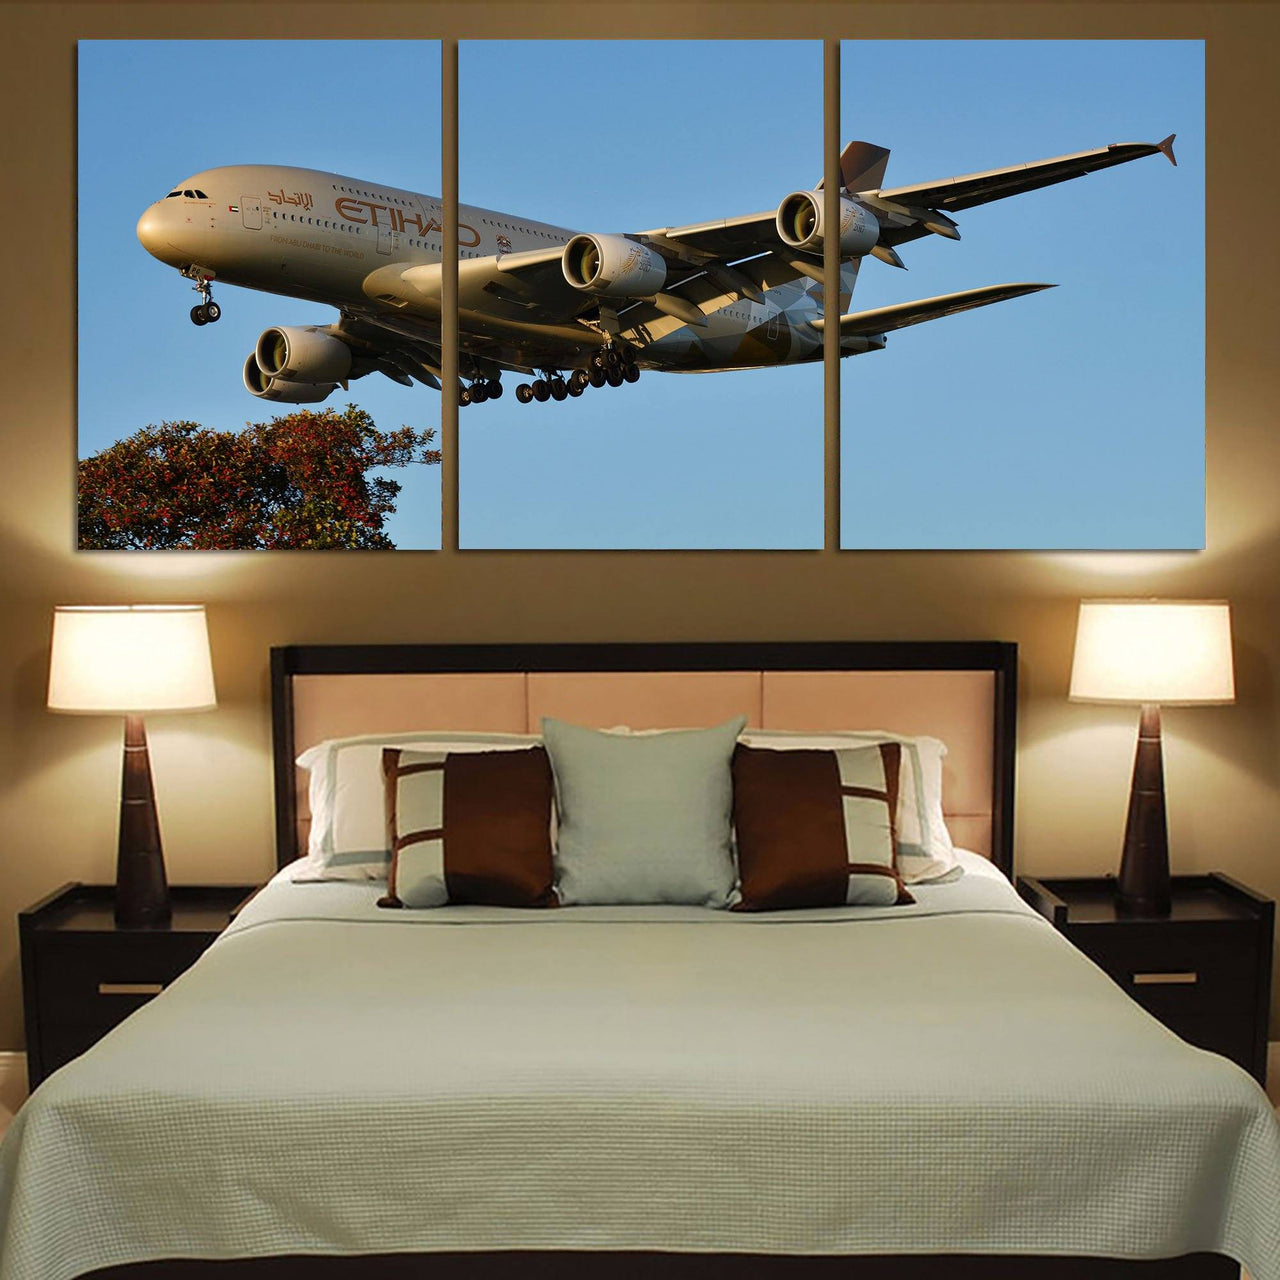 Etihad Airways A380 Printed Canvas Posters (3 Pieces) Aviation Shop 